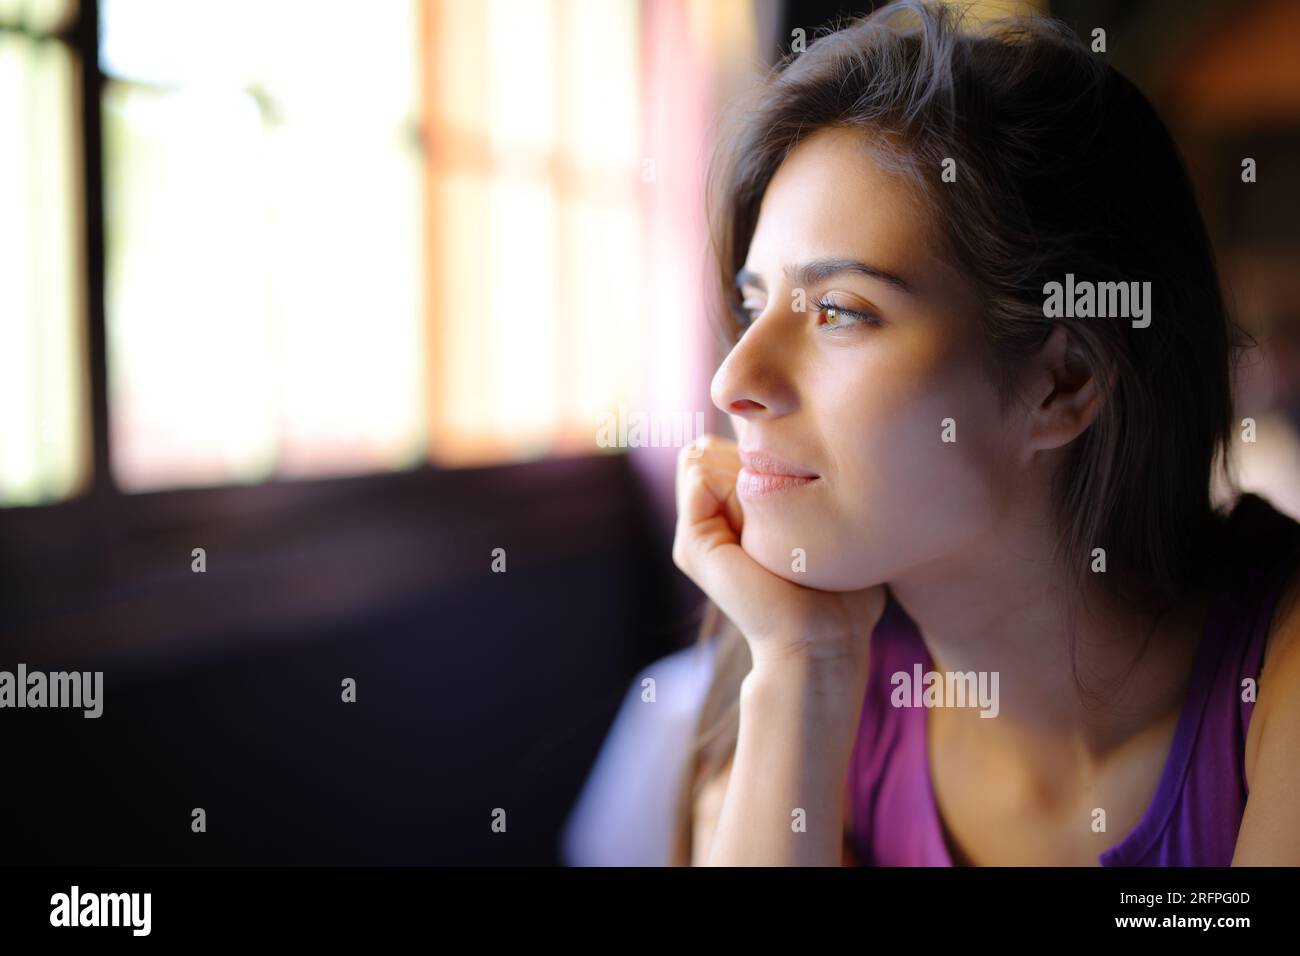 Satisfied woman looks through a window at home Stock Photo